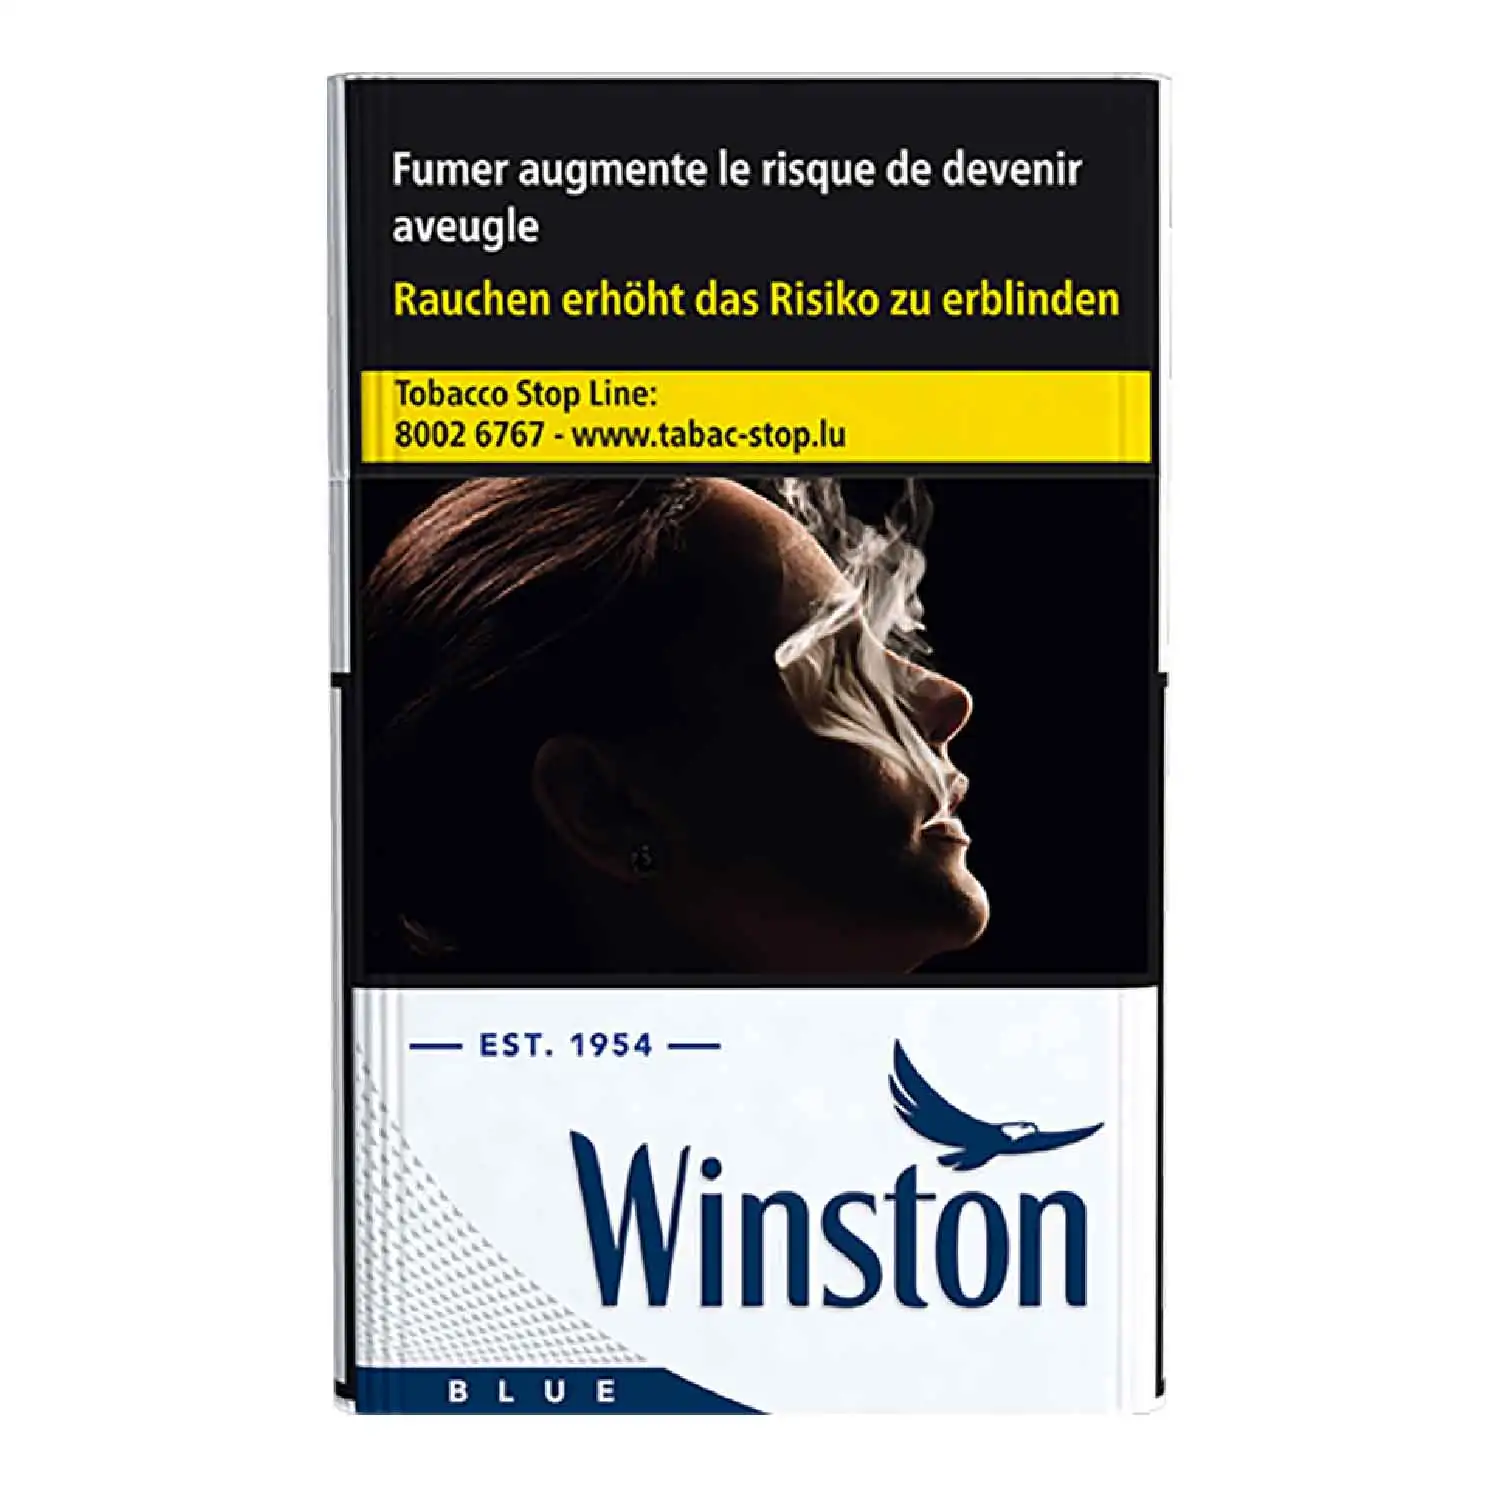 Winston blue 20 (S) - Buy at Real Tobacco